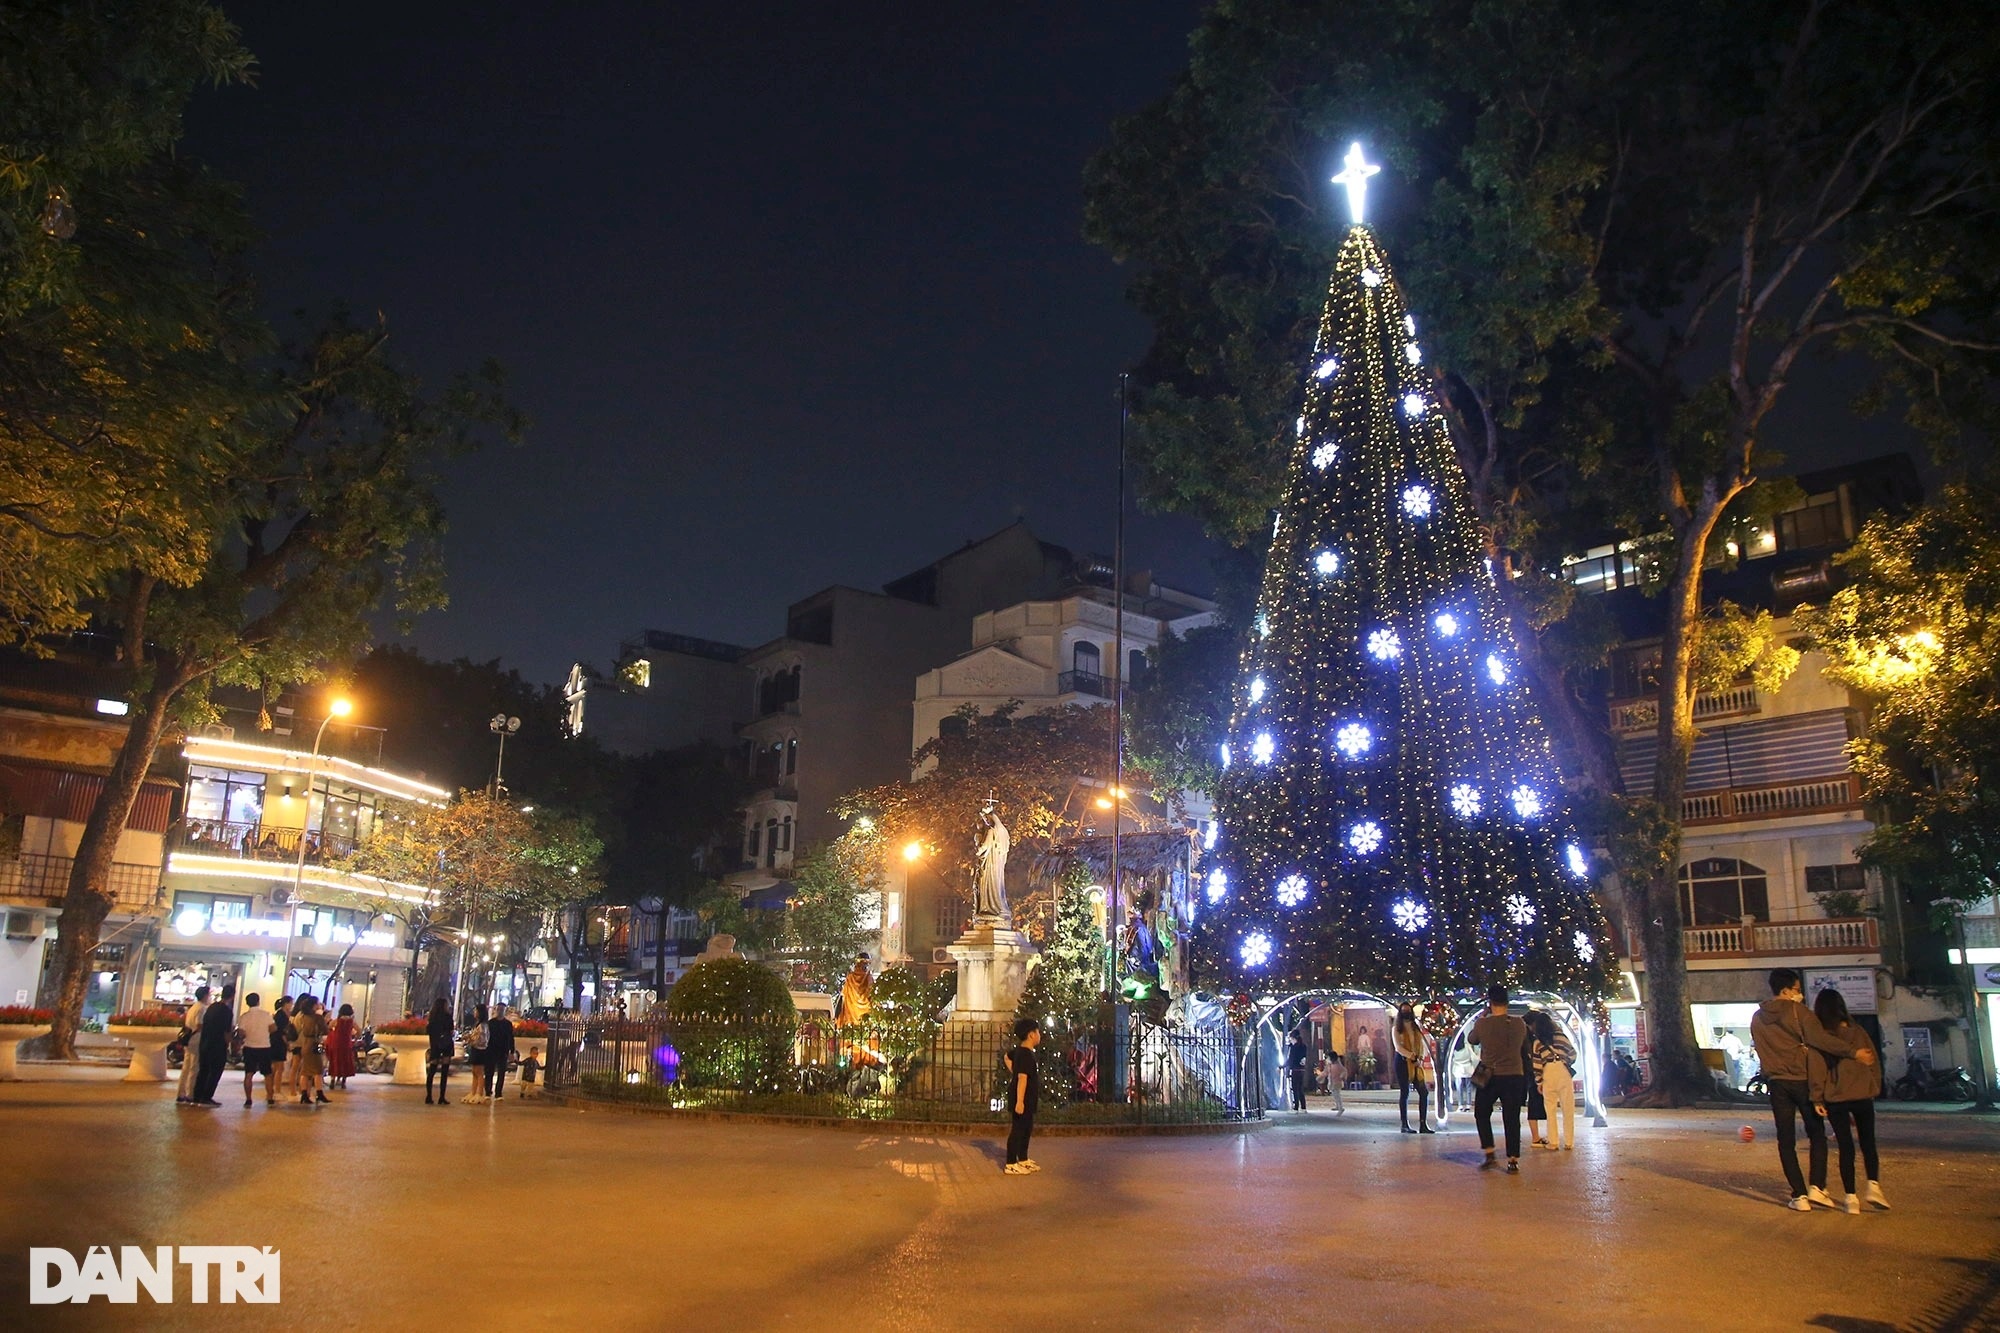 Churches in Hanoi are sparkling to welcome Christmas 2021 - 11